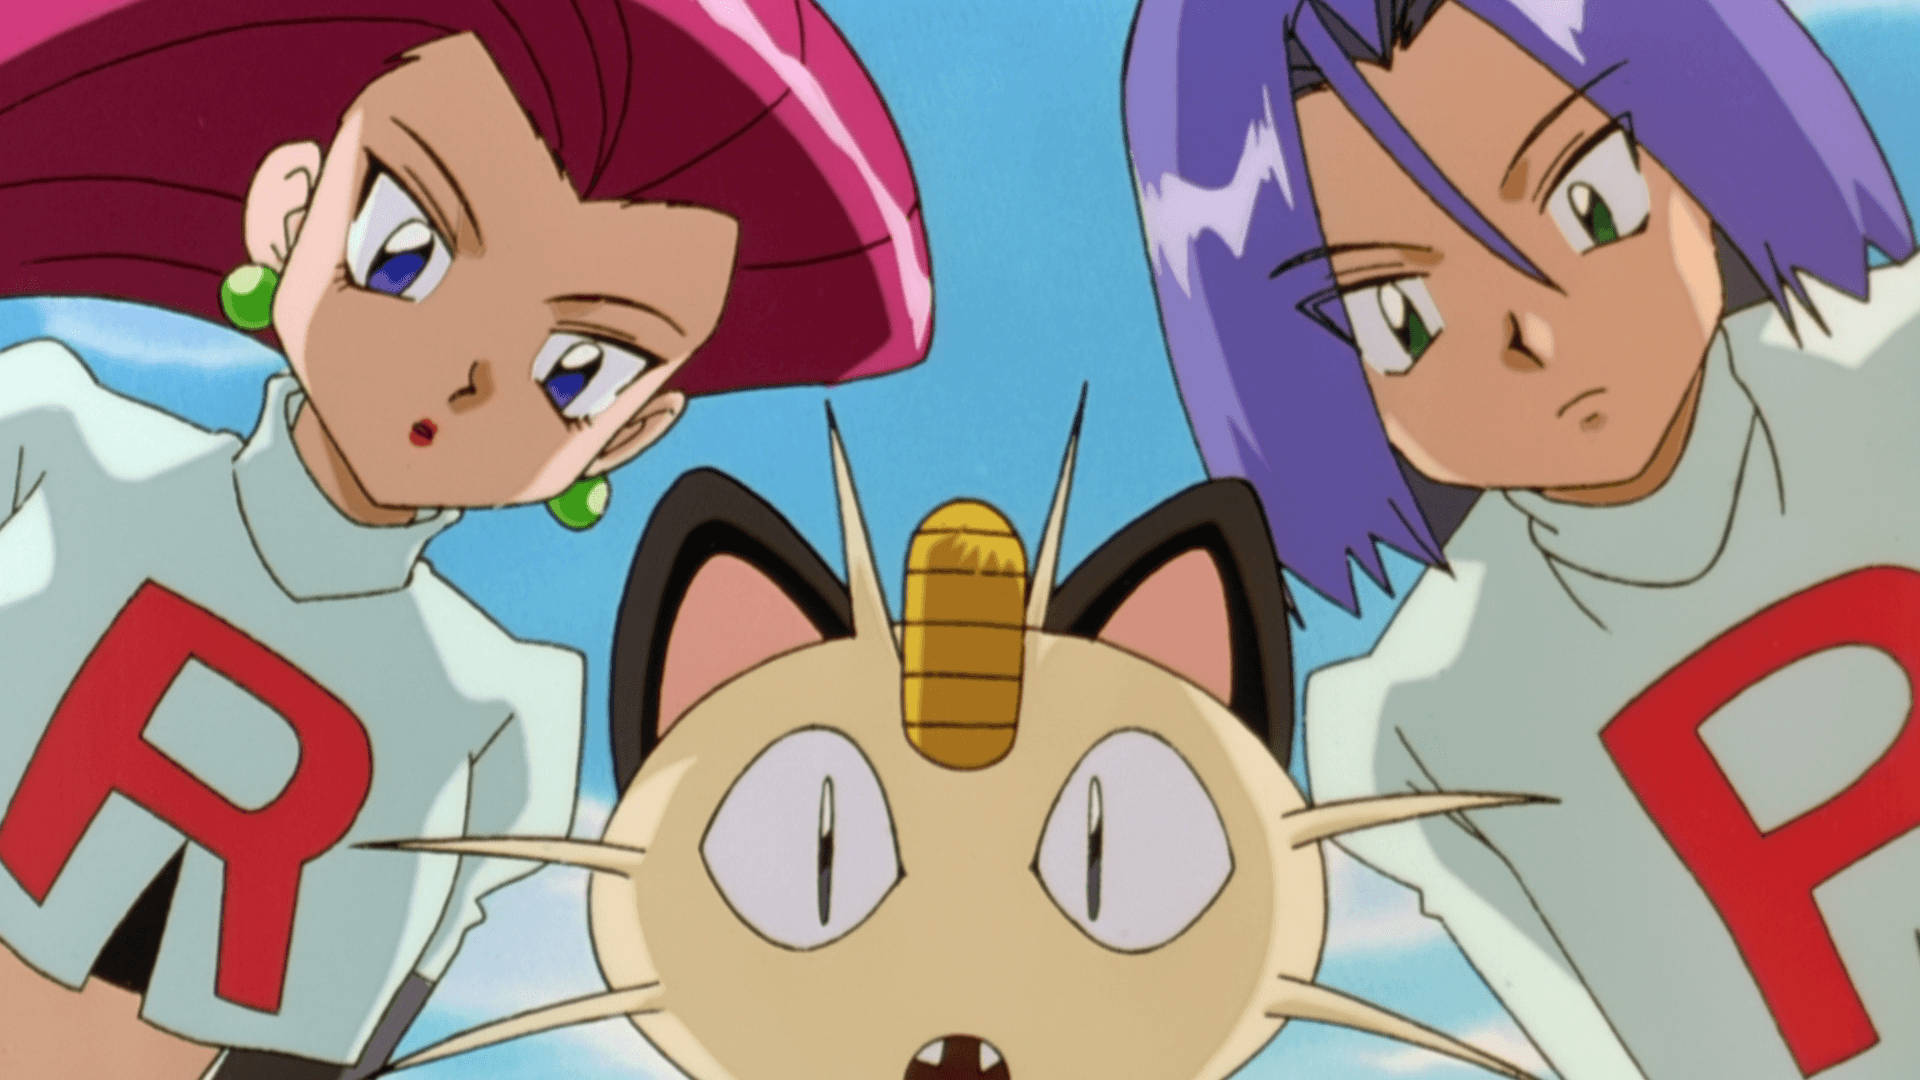 Meowth And Team Rocket Looking At You Wallpaper